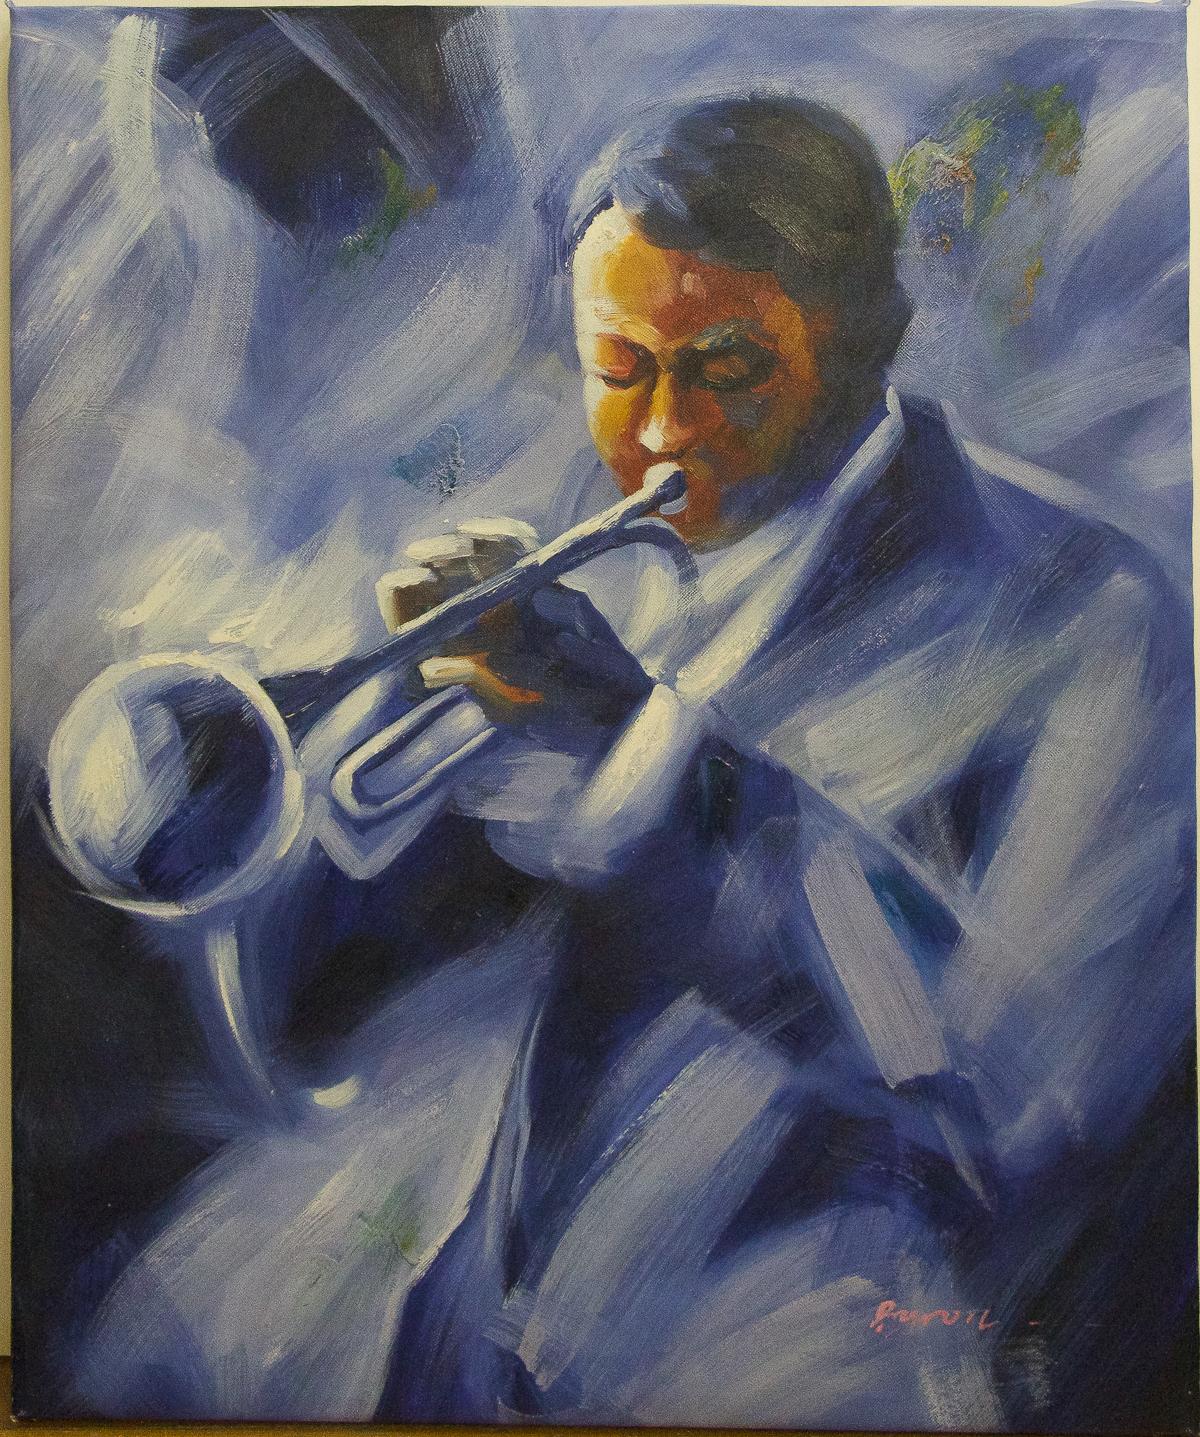 Unknown Portrait Painting - "Untitled (Jazz Musician)" Signed Painting on Canvas 